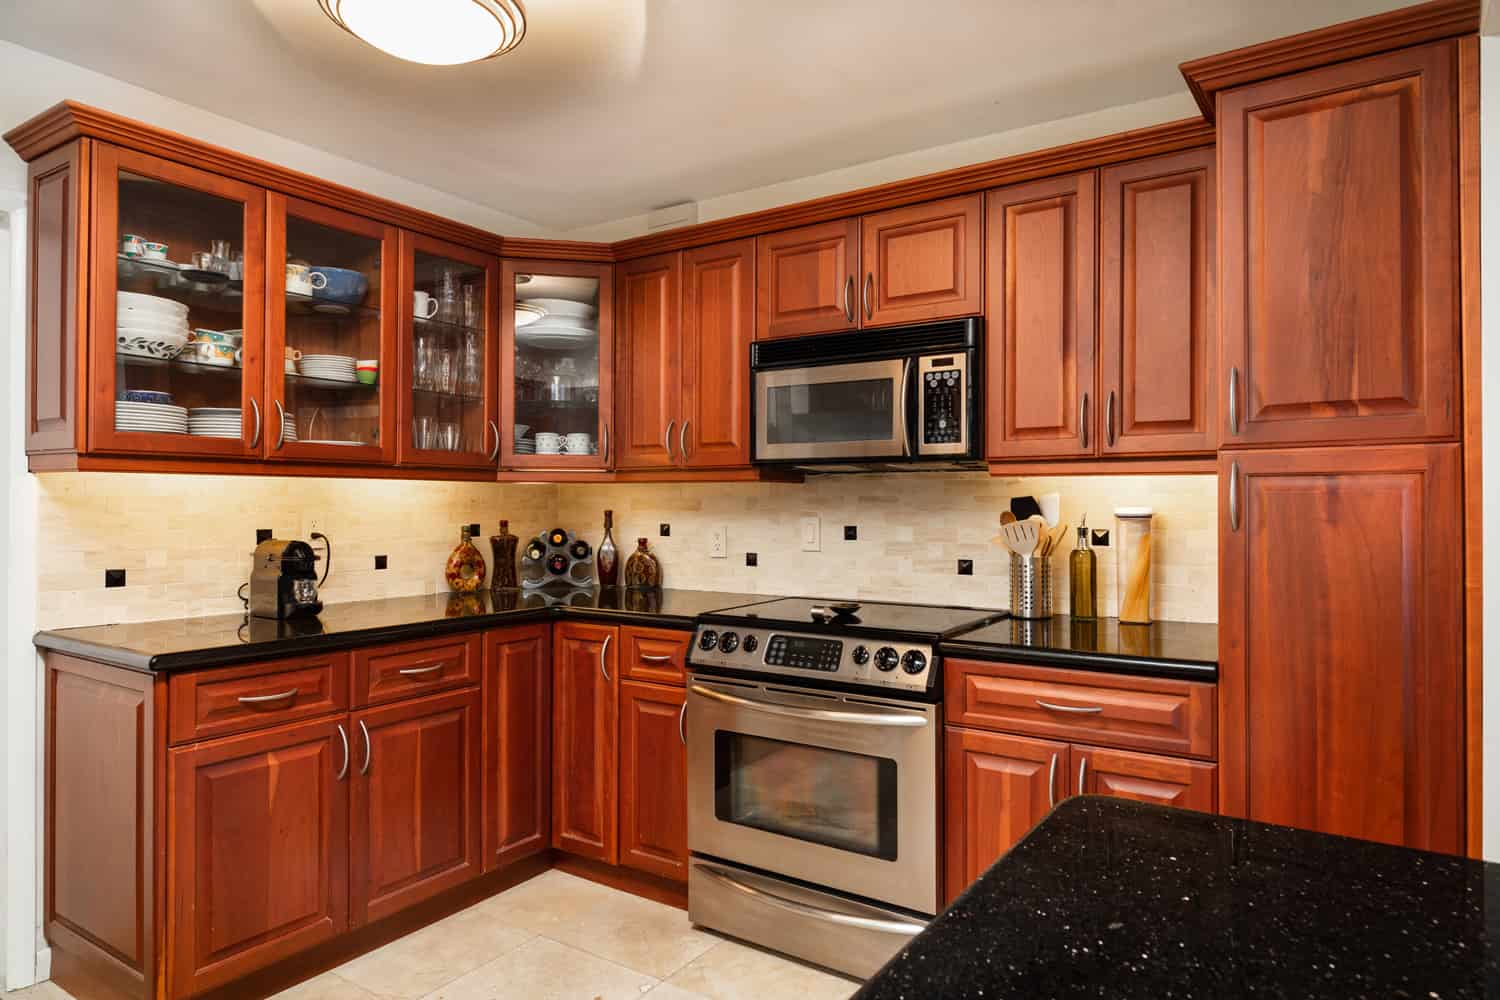 Traditional cheery wood cabinet home kitchen with a black granite countertop.